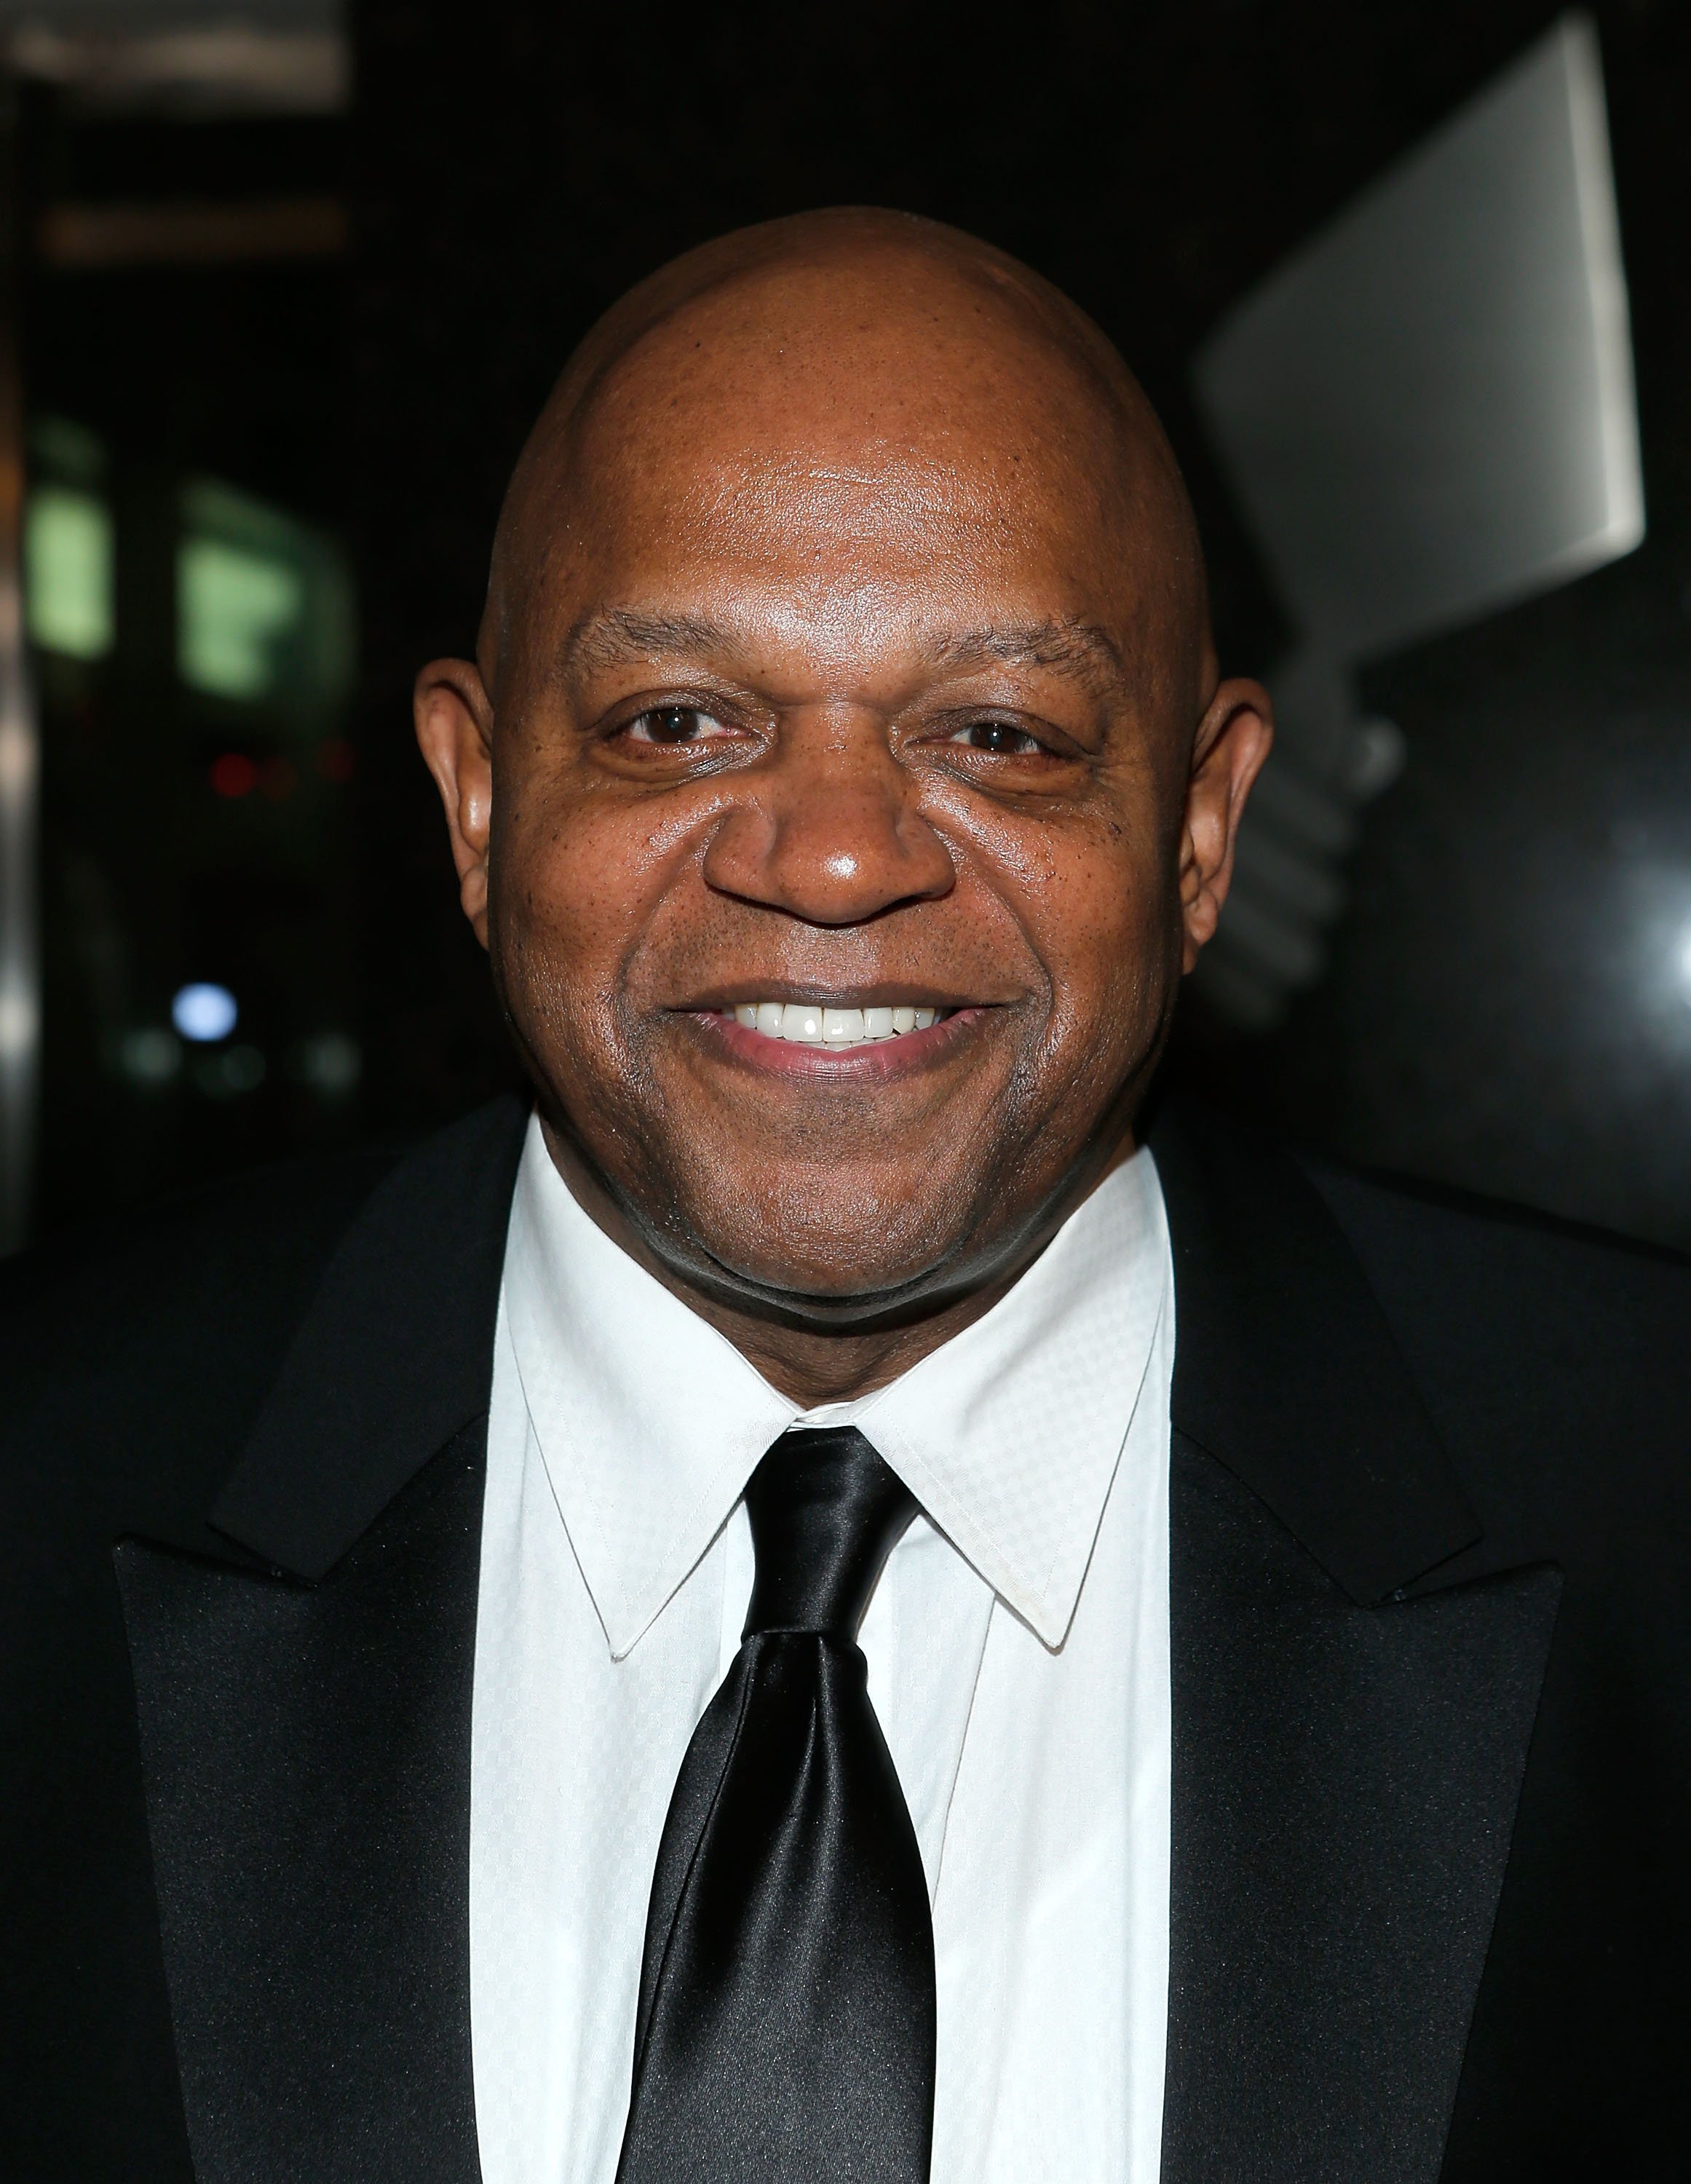  Charles Dutton at The Hip-Hop Inaugural Ball II at Harman Center for the Arts on January 20, 2013 in Washington, DC | Photo: Getty Images